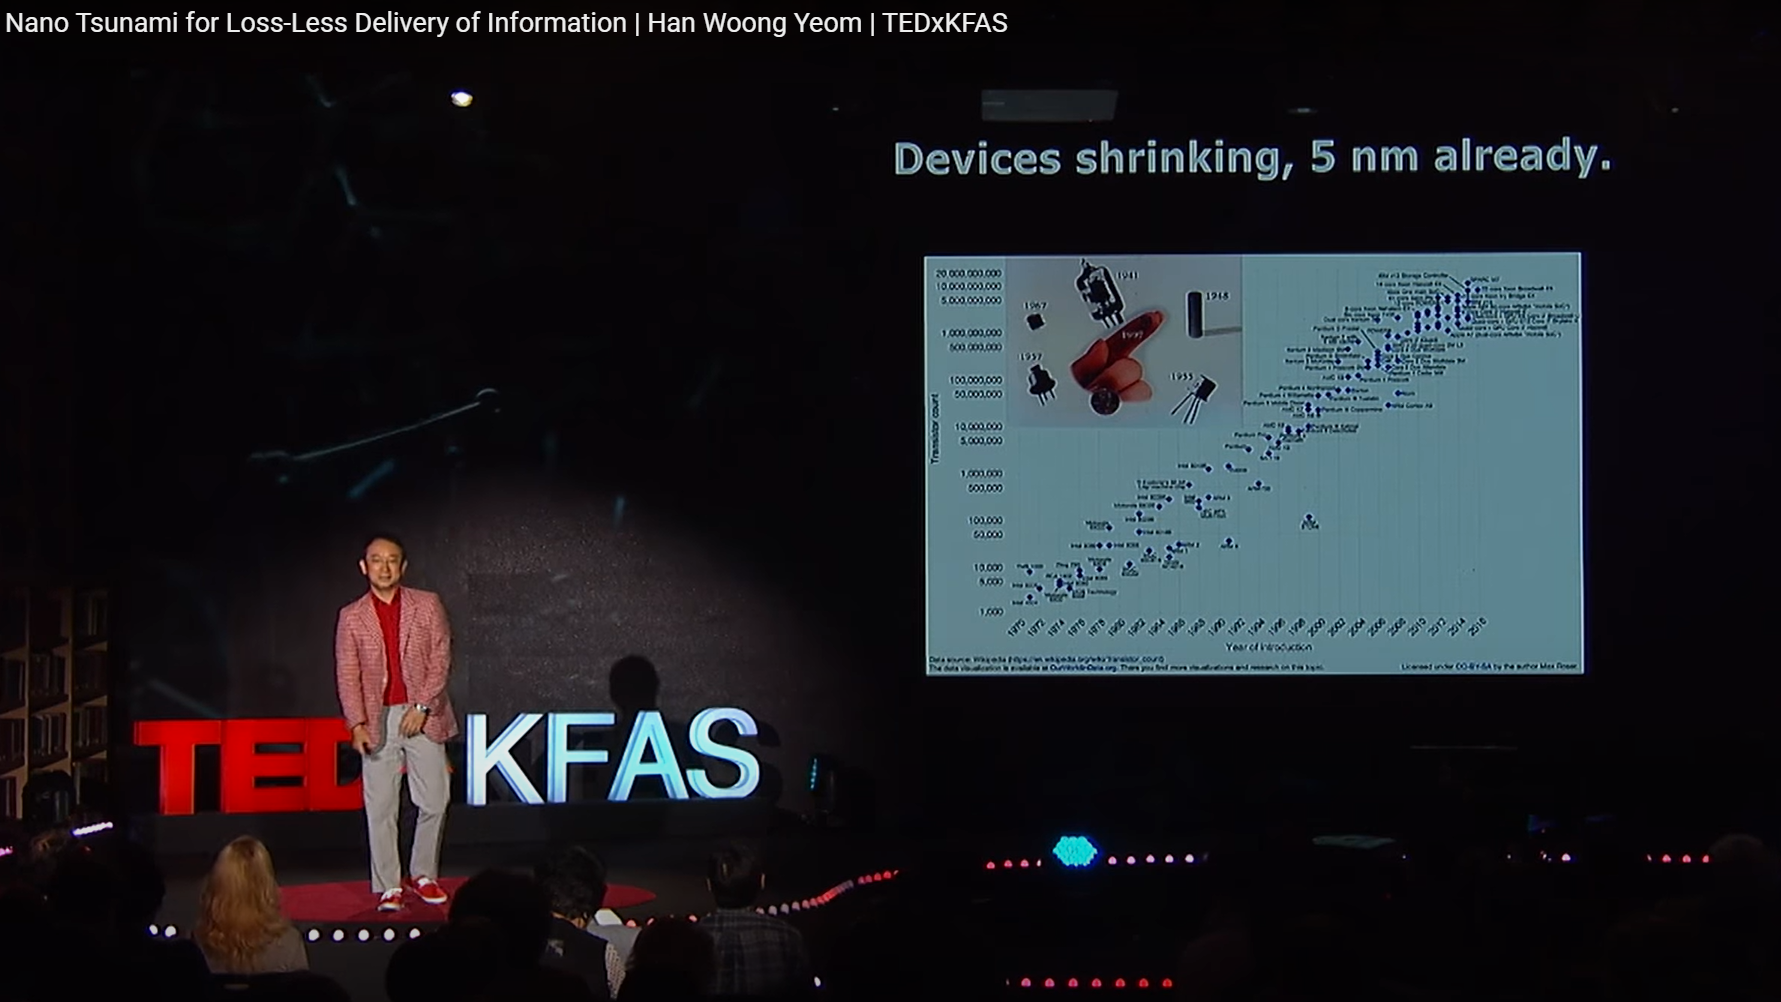 [TEDxKFAS] Nano Tsunami for Loss-Less Delivery of Information | Han Woong Yeom